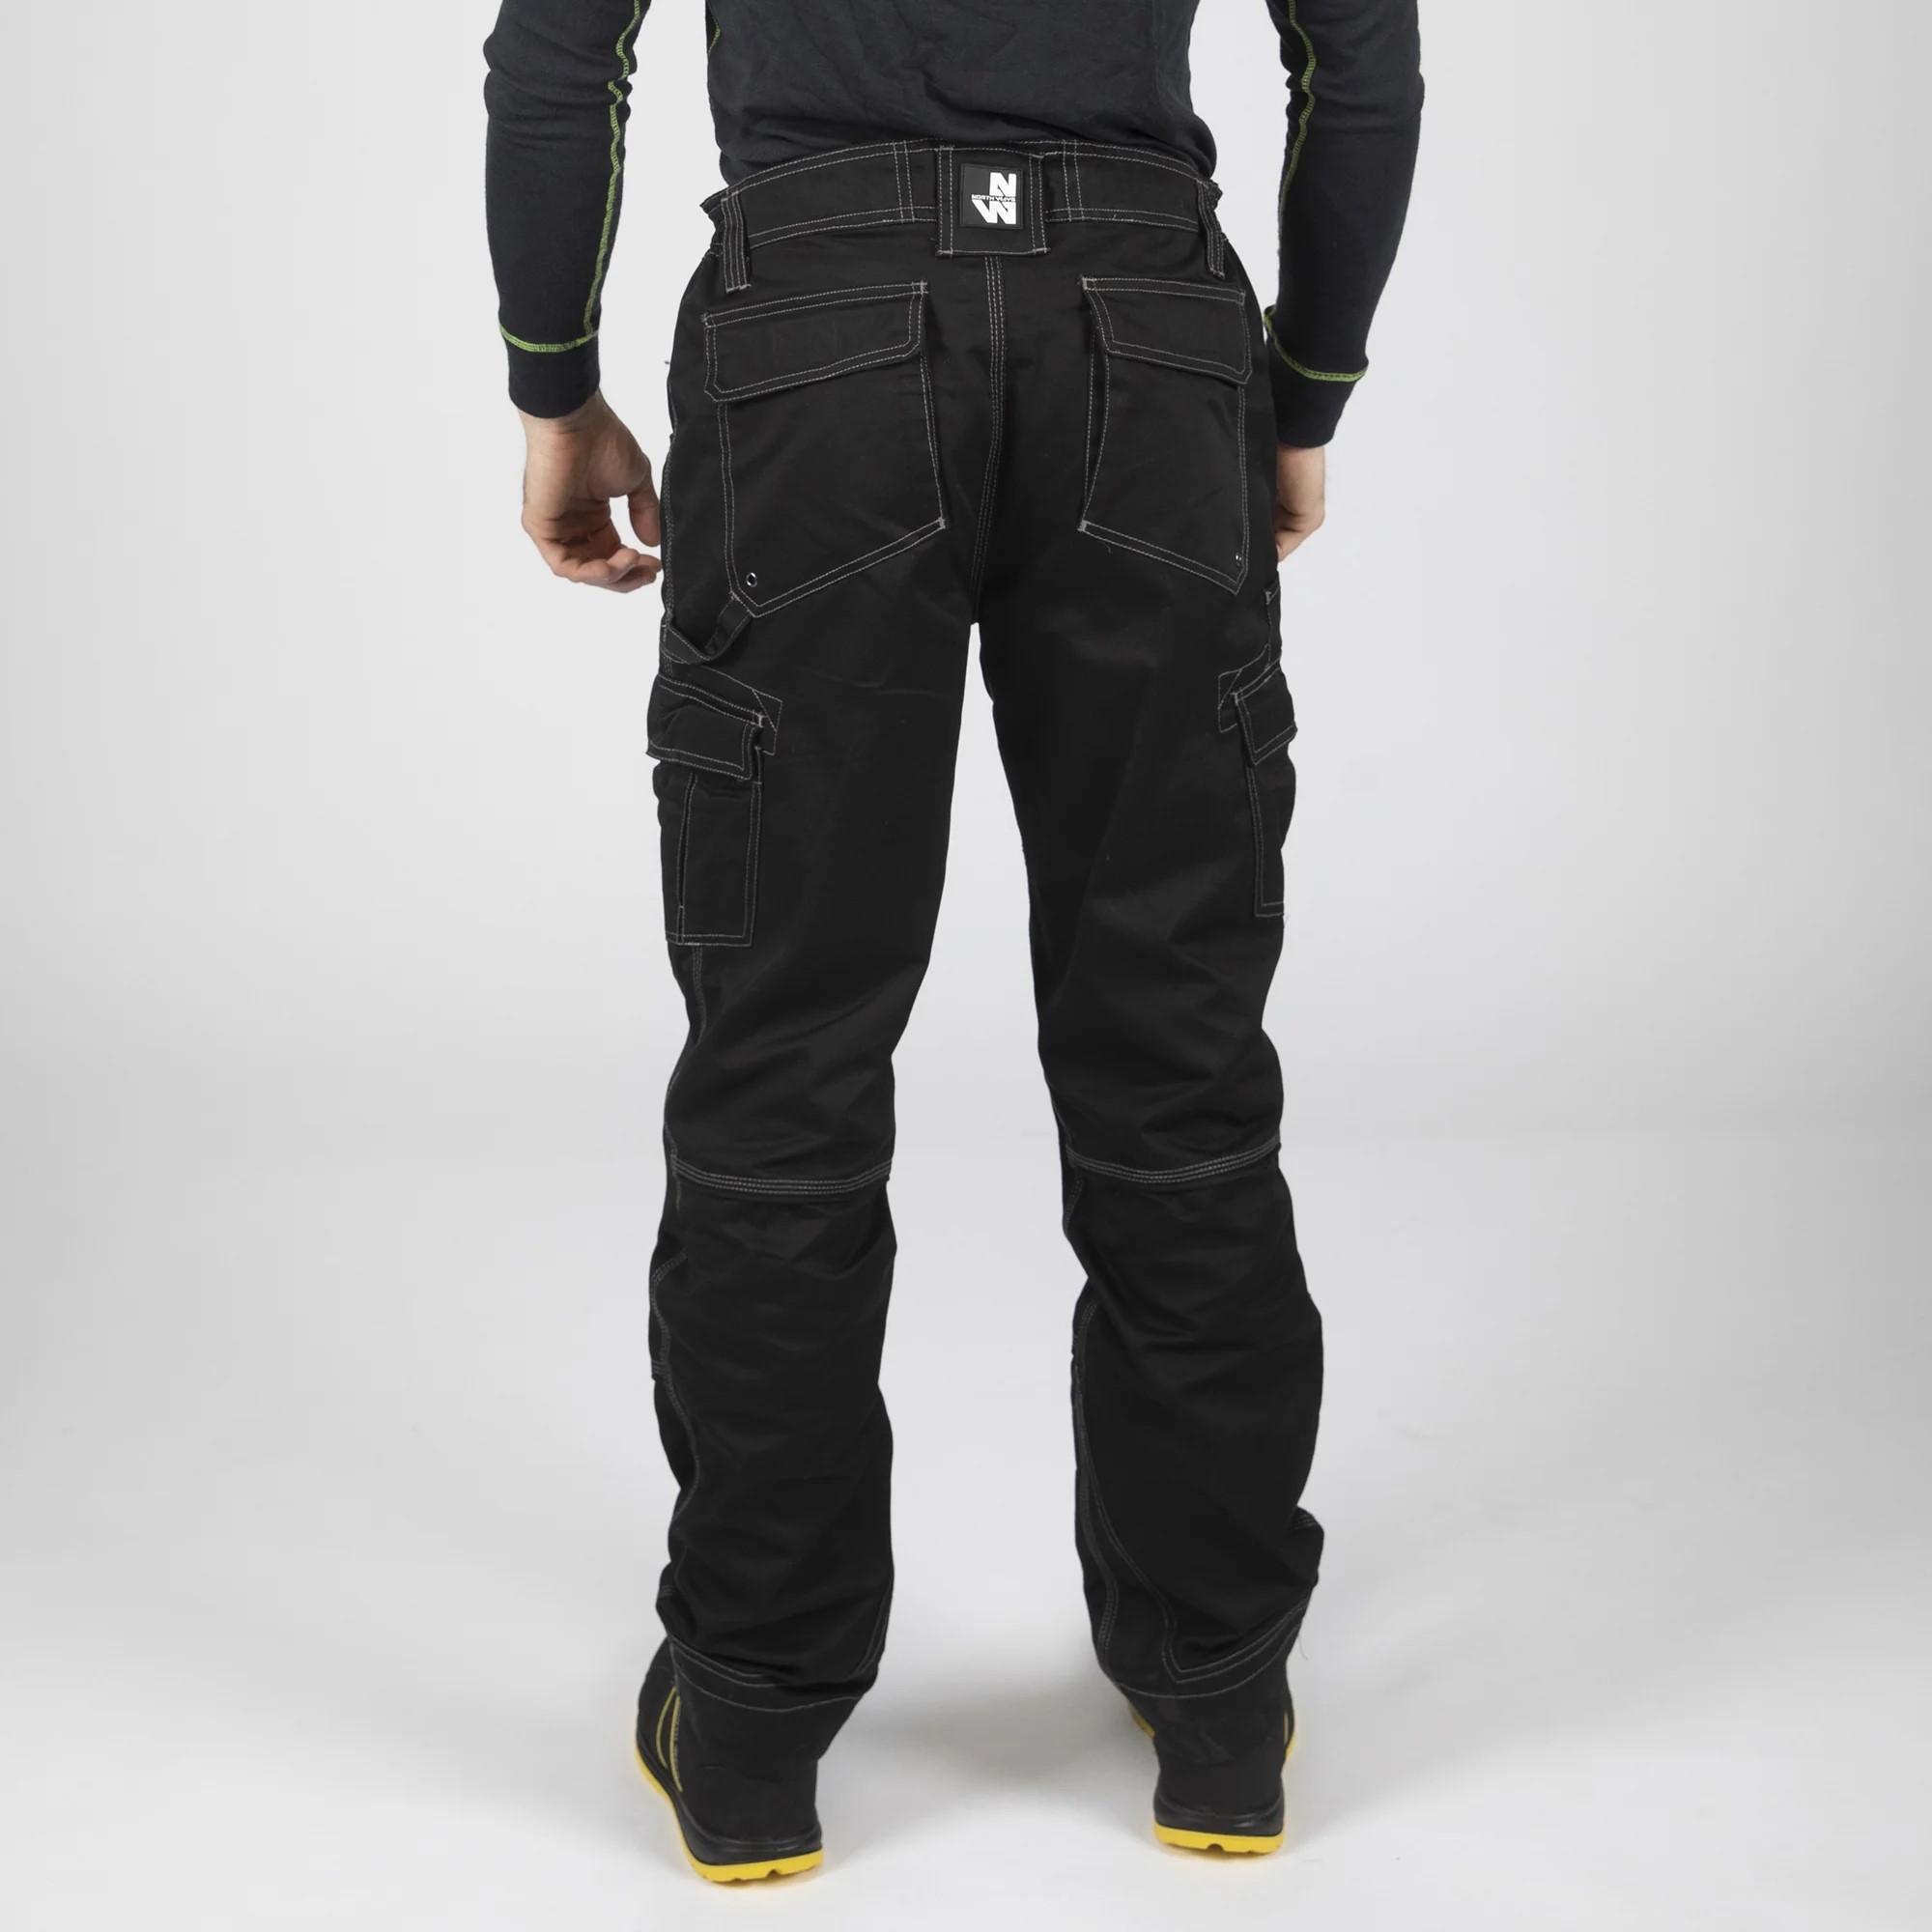 Pantalon travail multipoches homme Antras NW noir dos